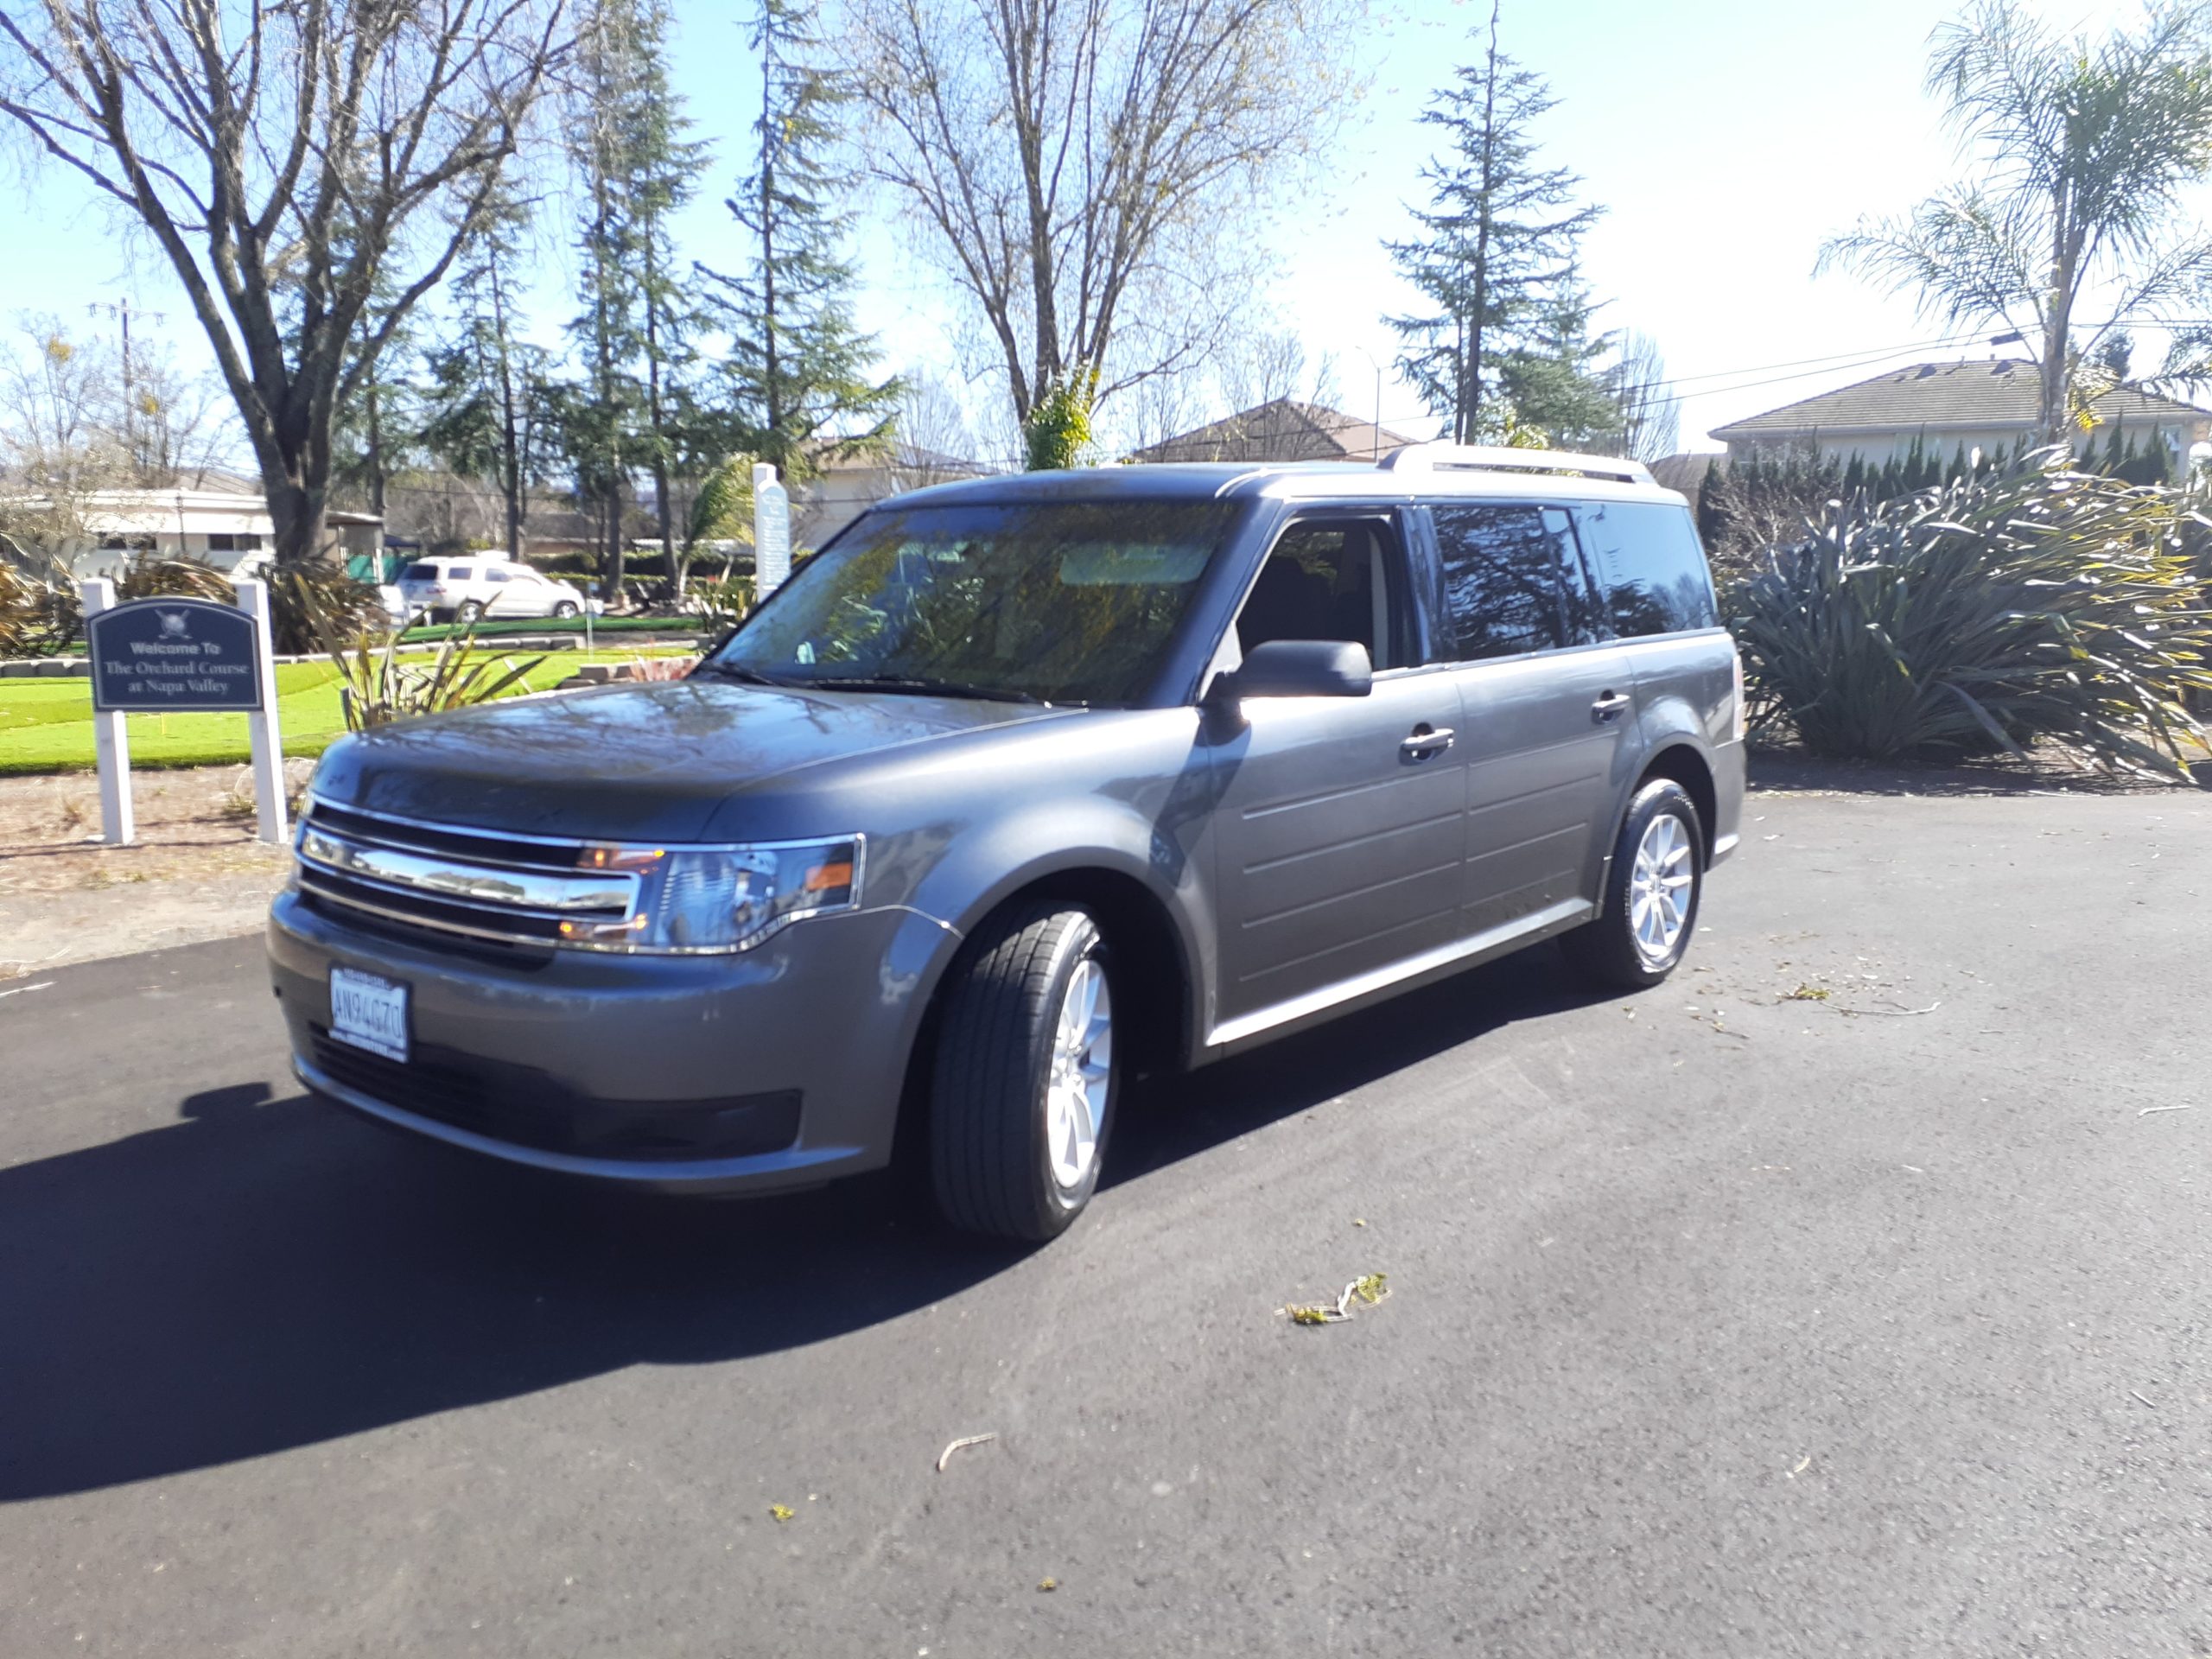 Ford Flex SUV $80 an hour with a 6 hour minimum and 20% gratuity for the driver!.  Special no gas fee untill 1/31/2024 NO FUEL FEE IF STAYING AND THE ITINERARY IS AROUND NAPA!